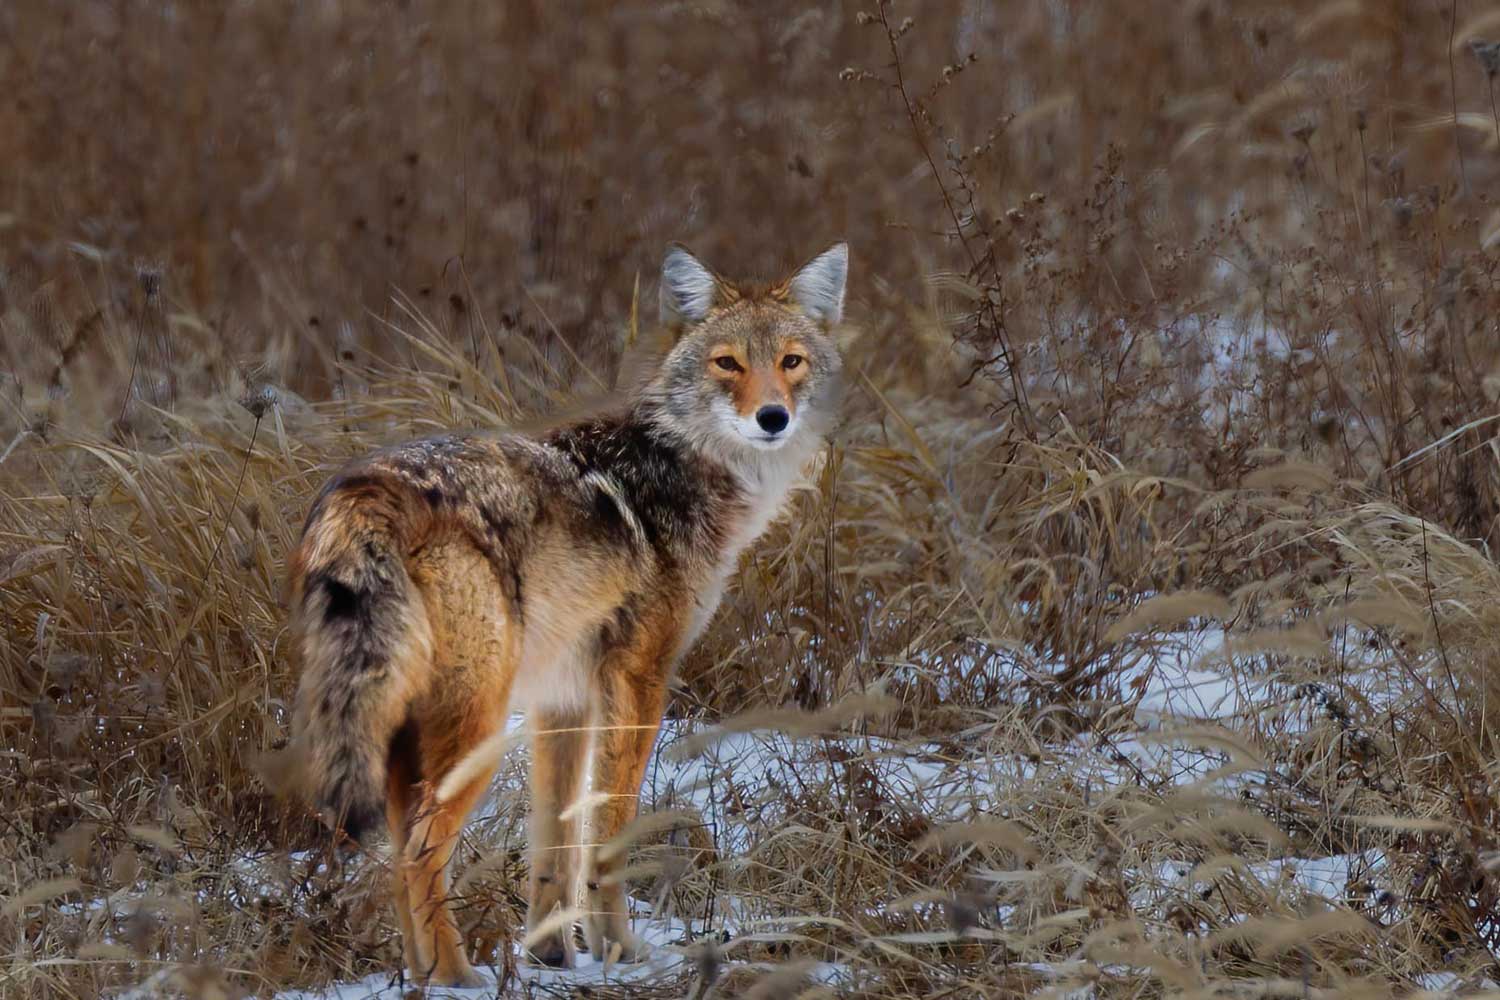 A coyote standing in a snow-covered field.